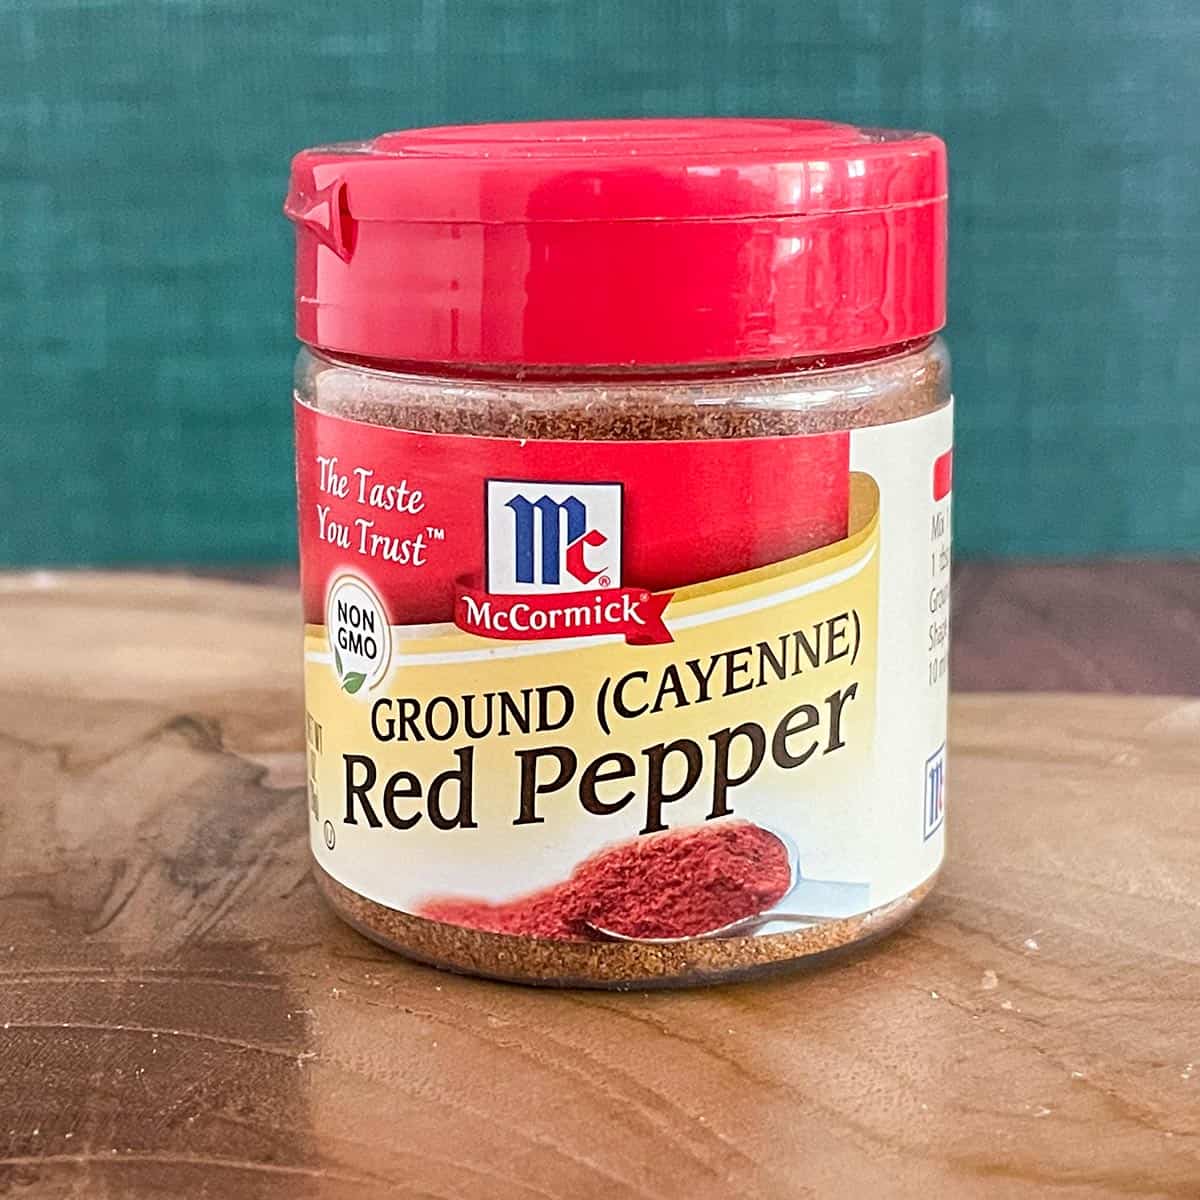 Jar of Ground Cayenne red pepper on a wooden slab.